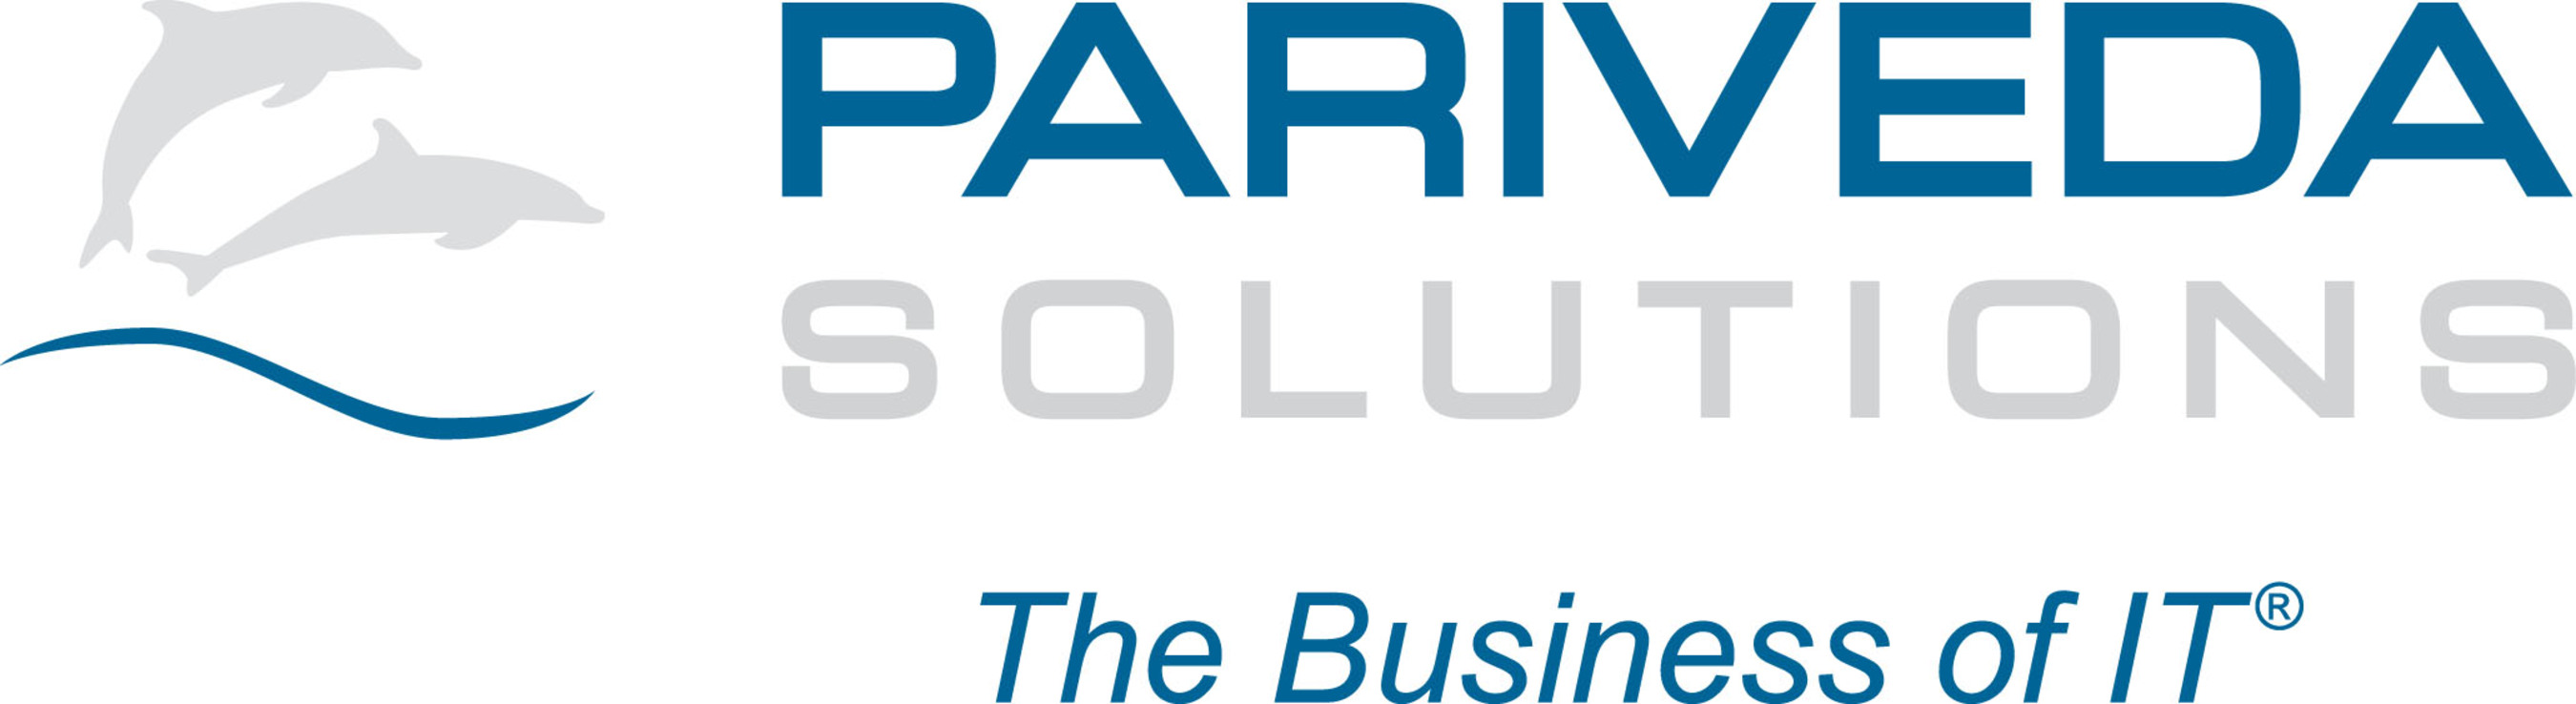 Pariveda Solutions, Inc. is a leading technology consulting firm delivering strategic services and technology solutions. (PRNewsFoto/Pariveda Solutions, Inc.)